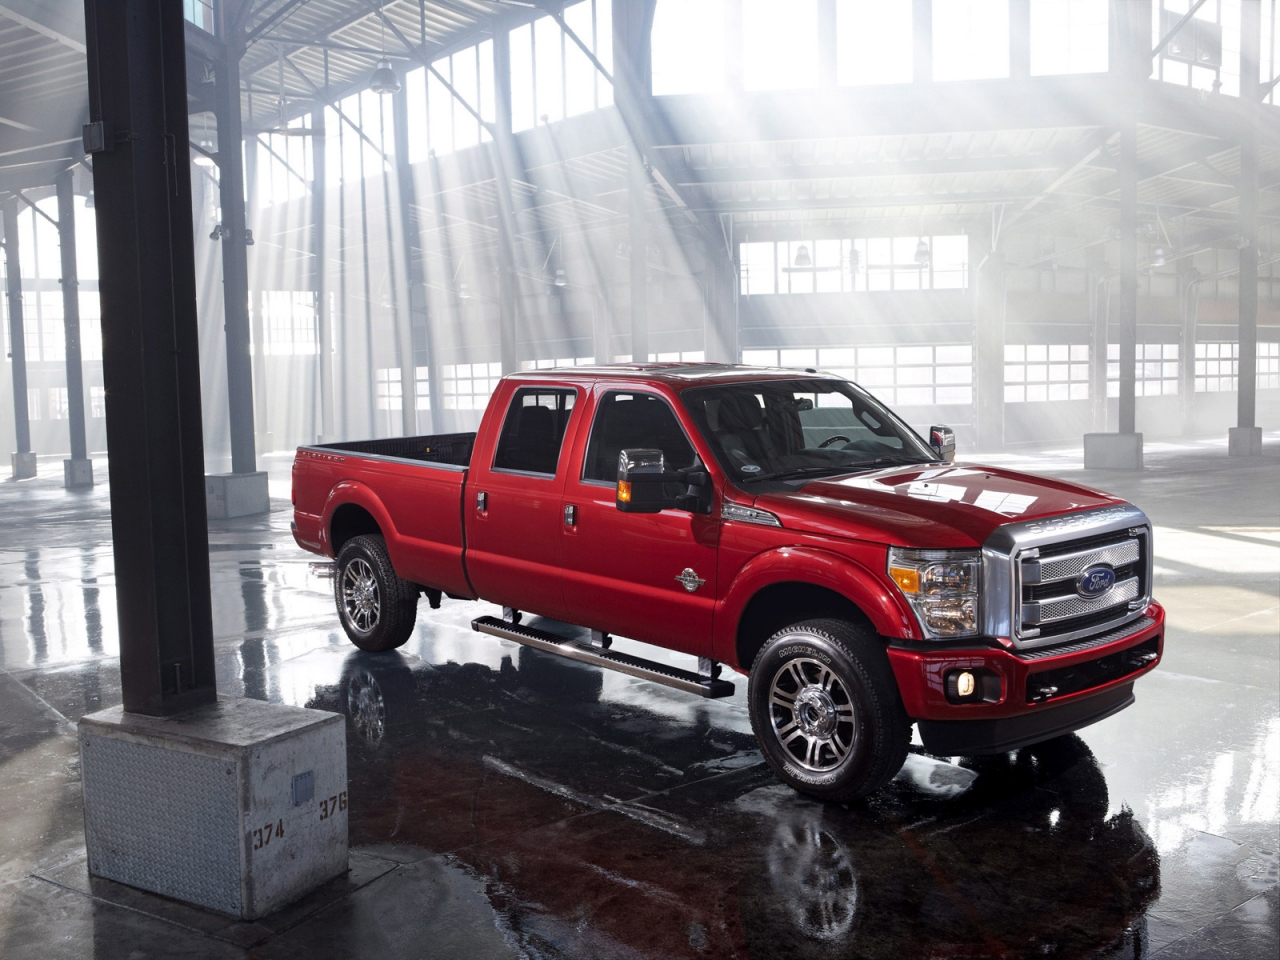 2013 Ford Super Duty Platinum Red for 1280 x 960 resolution